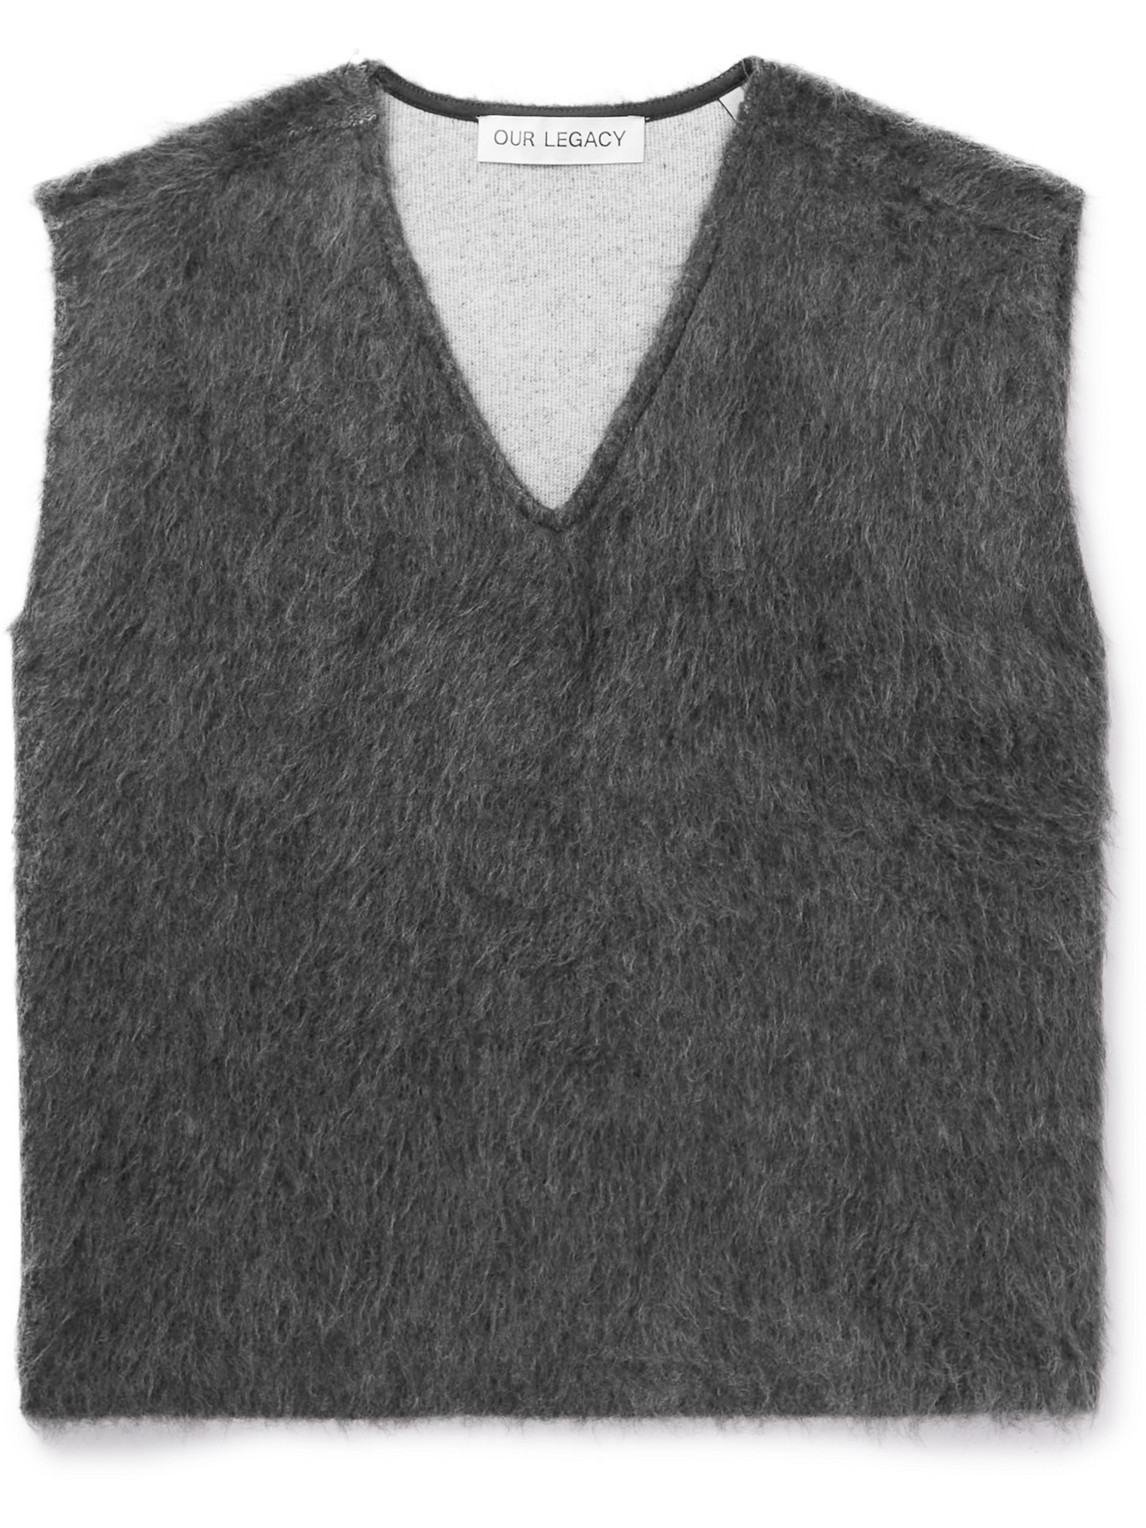 OUR LEGACY DOUBLE LOCK BRUSHED-KNIT jumper waistcoat